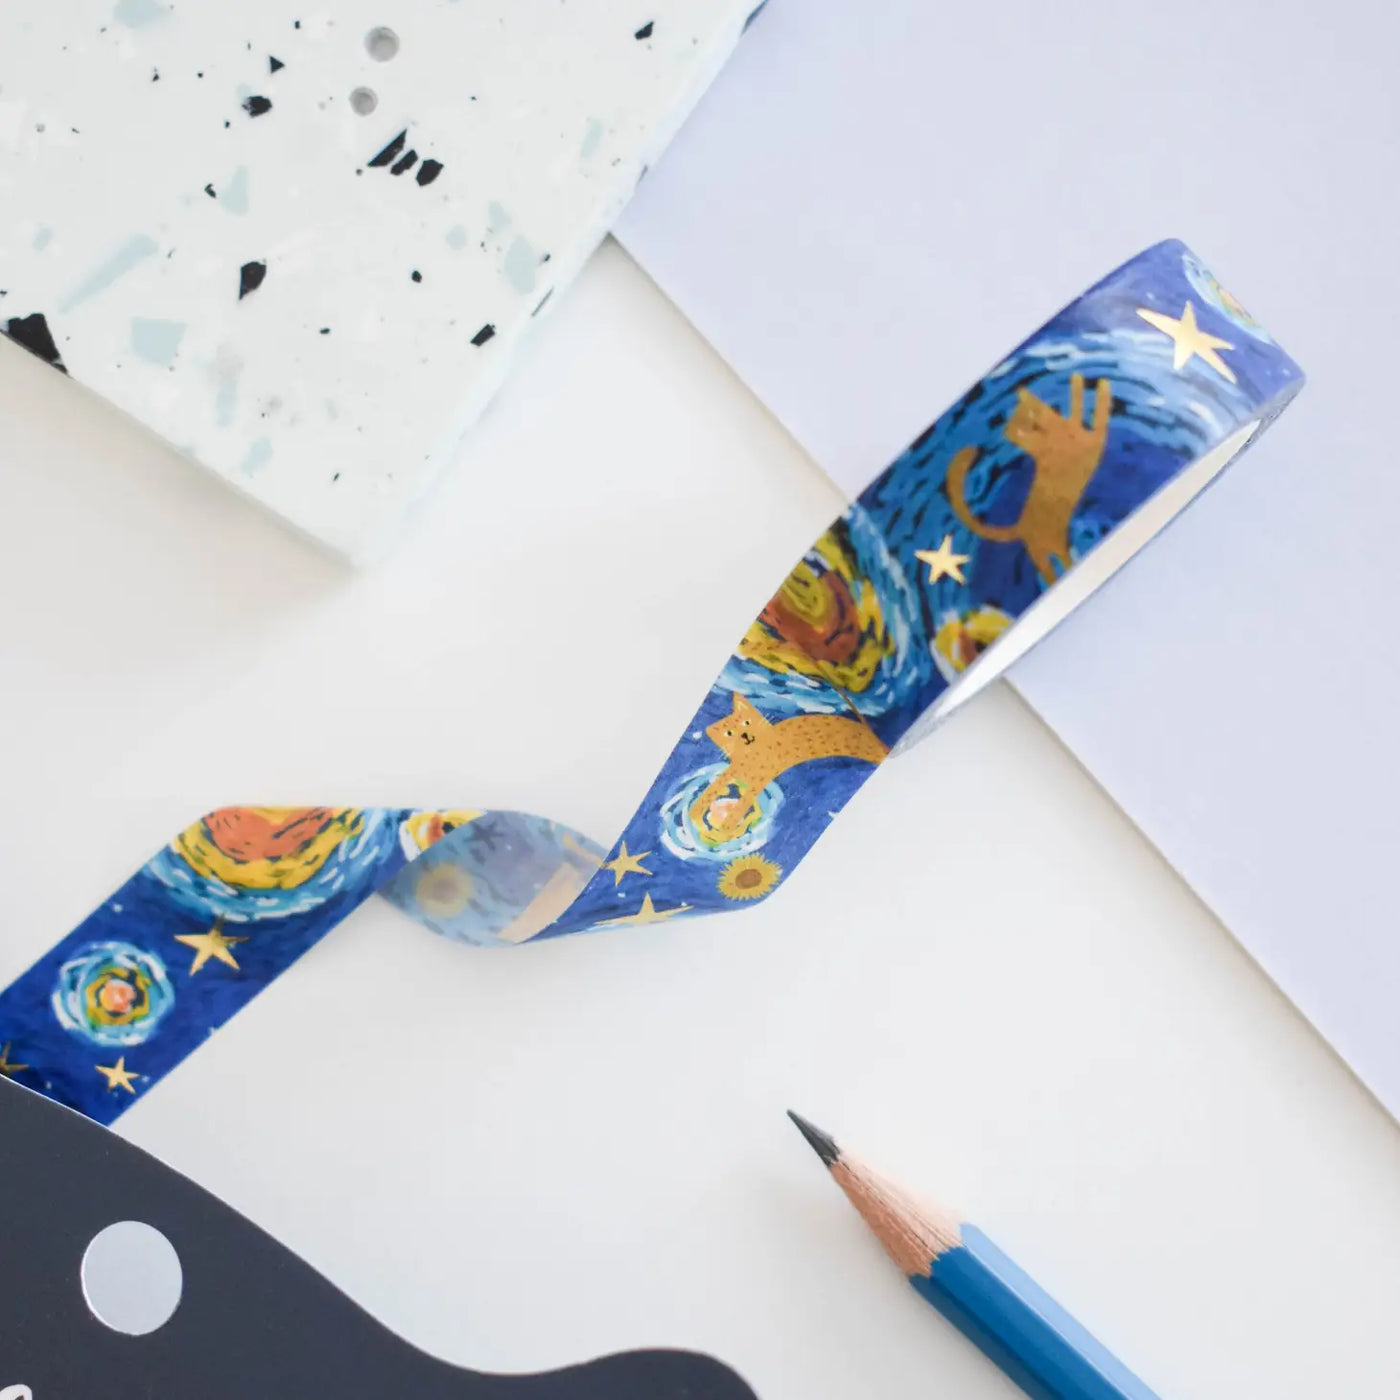 The ‘cat artist' wash tape range is a feline reimagining of some of the greatest artists of all time in stationery form.  The 'vincat' tape is a feline interpretation of artwork by, Vincent van Gogh (1853-1890) now reimagined as 'Vincat van Gogh.’